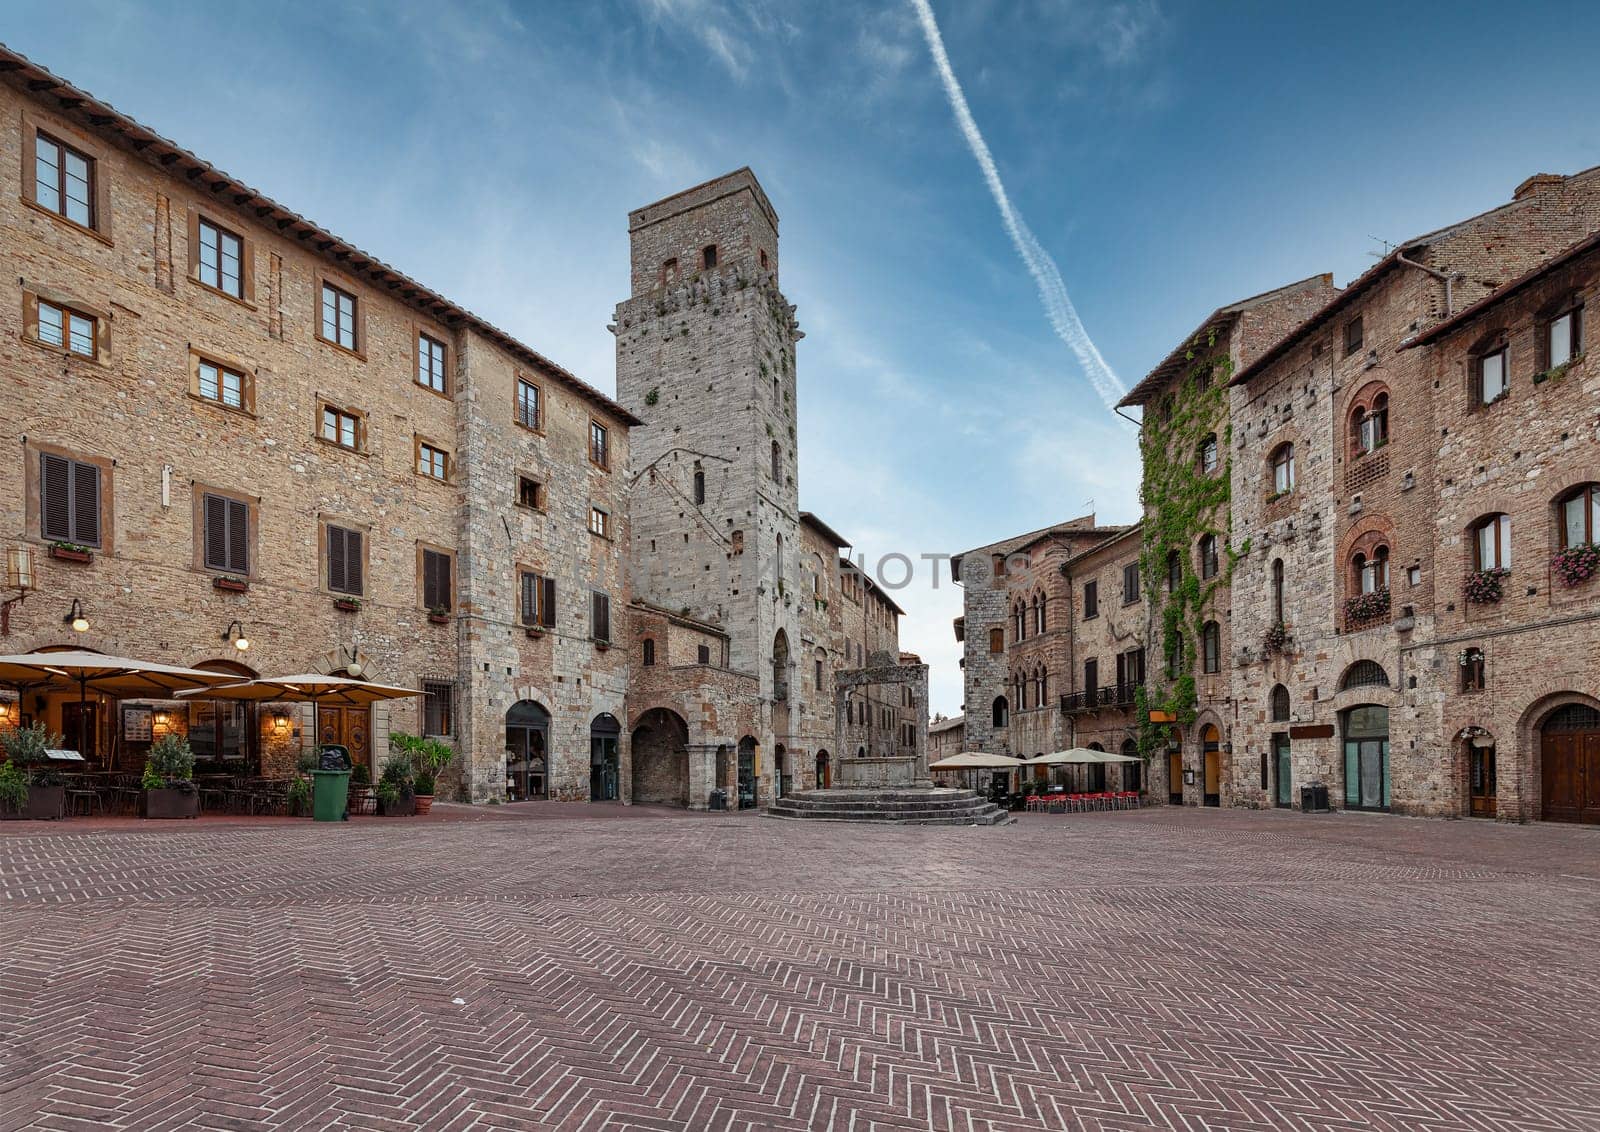 Panoramic view of famous Piazza della Cisterna in the historic town of San Gimignano on a morning, Tuscany, Italy.